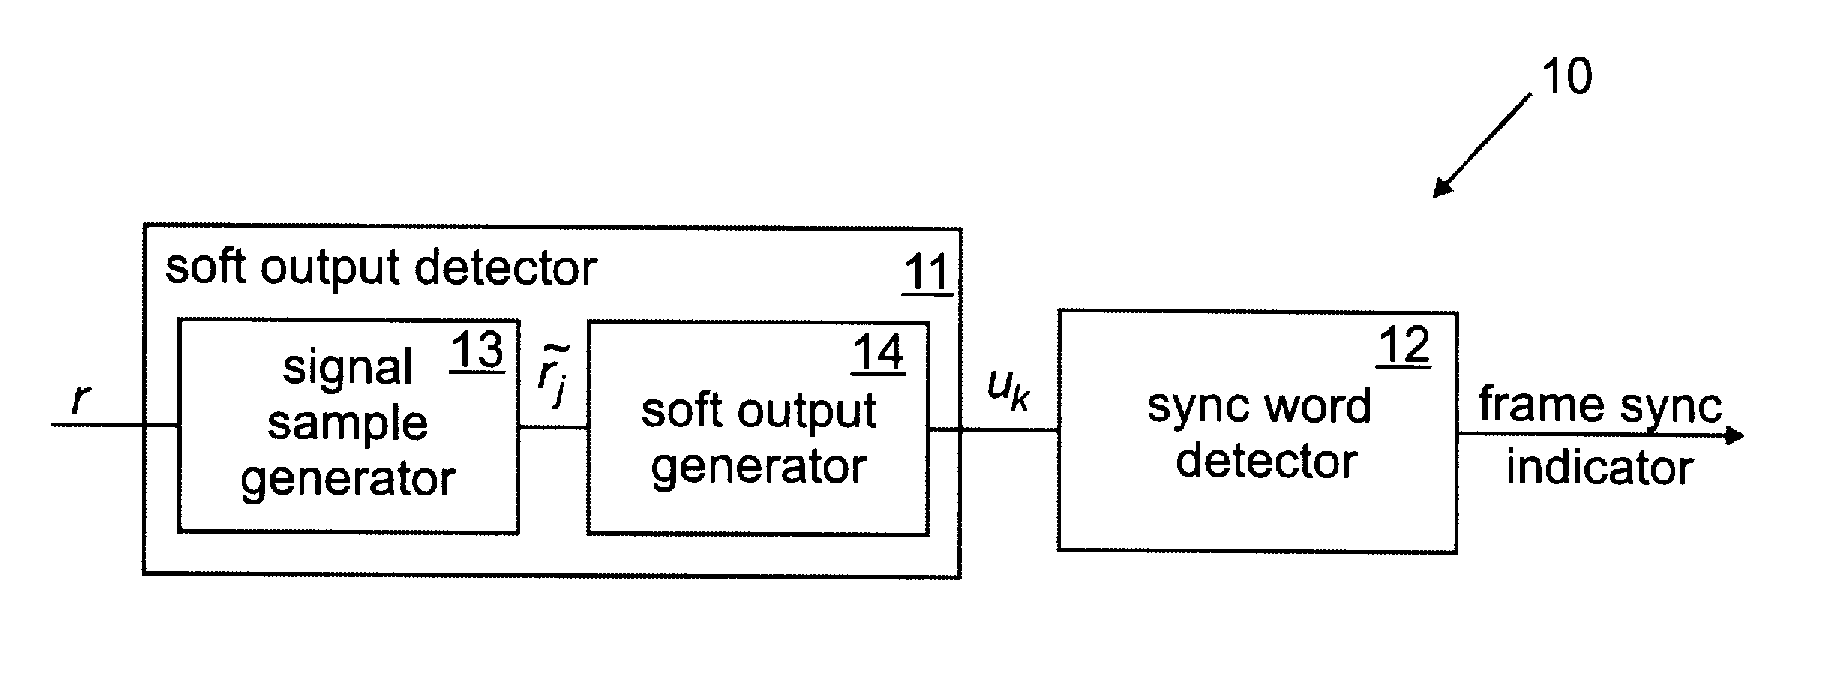 Word synchronization for servo read signals in tape drives